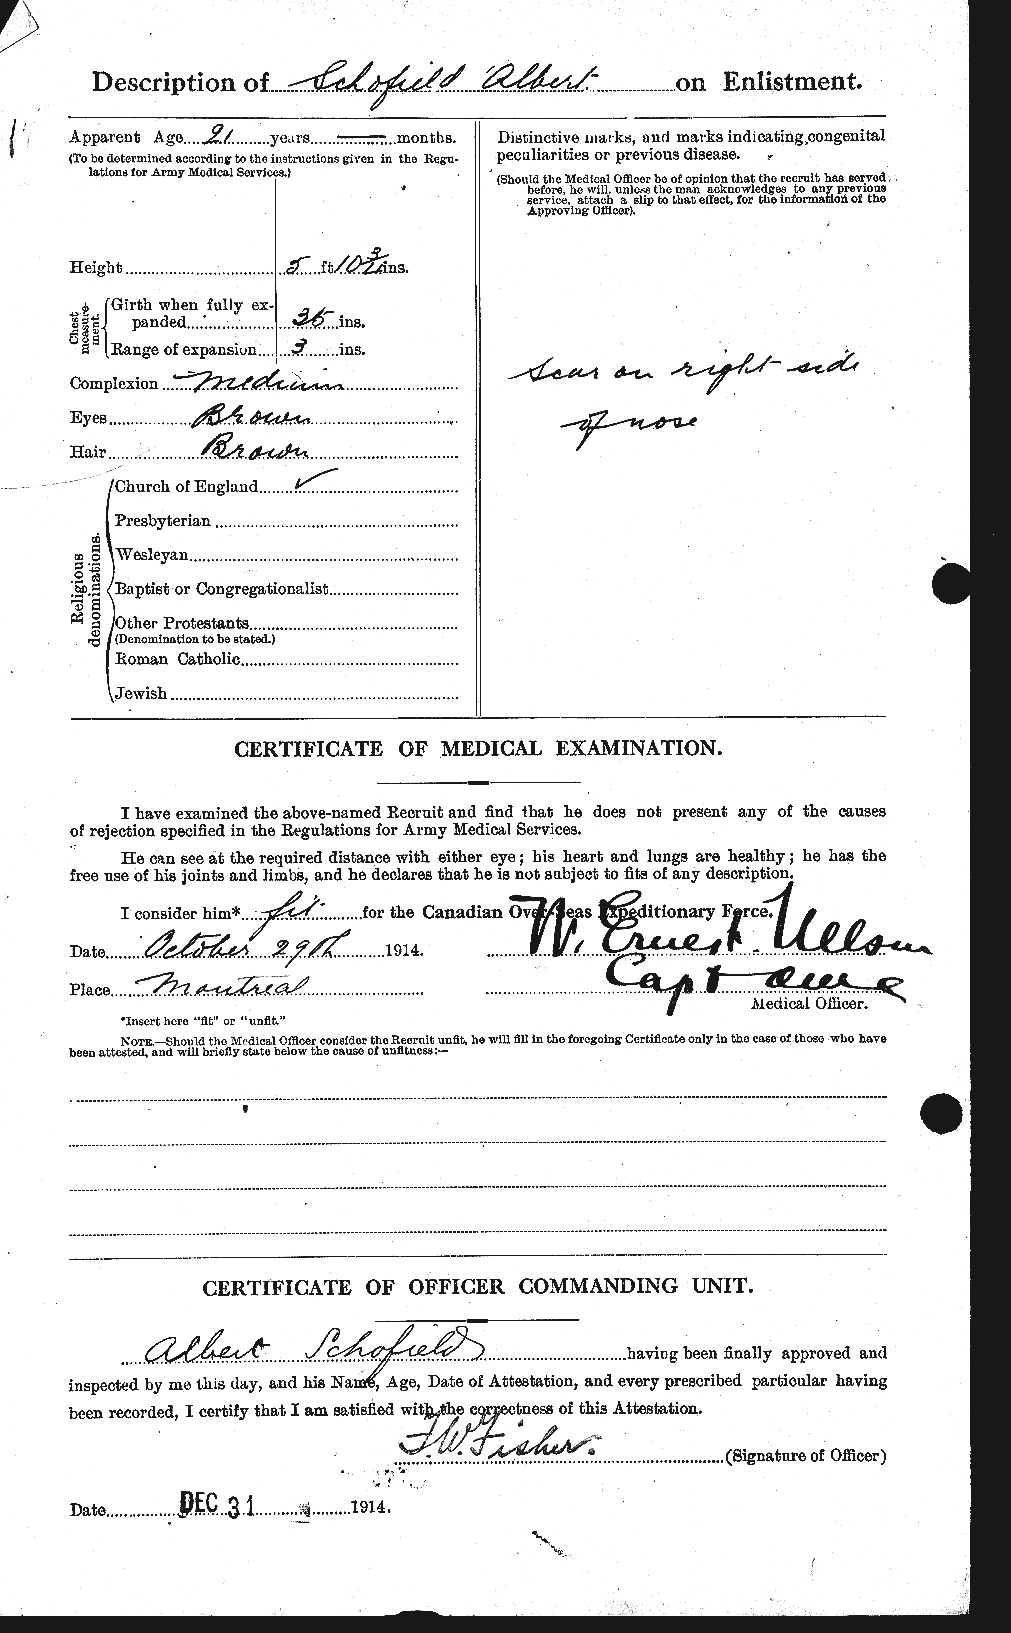 Personnel Records of the First World War - CEF 082230b